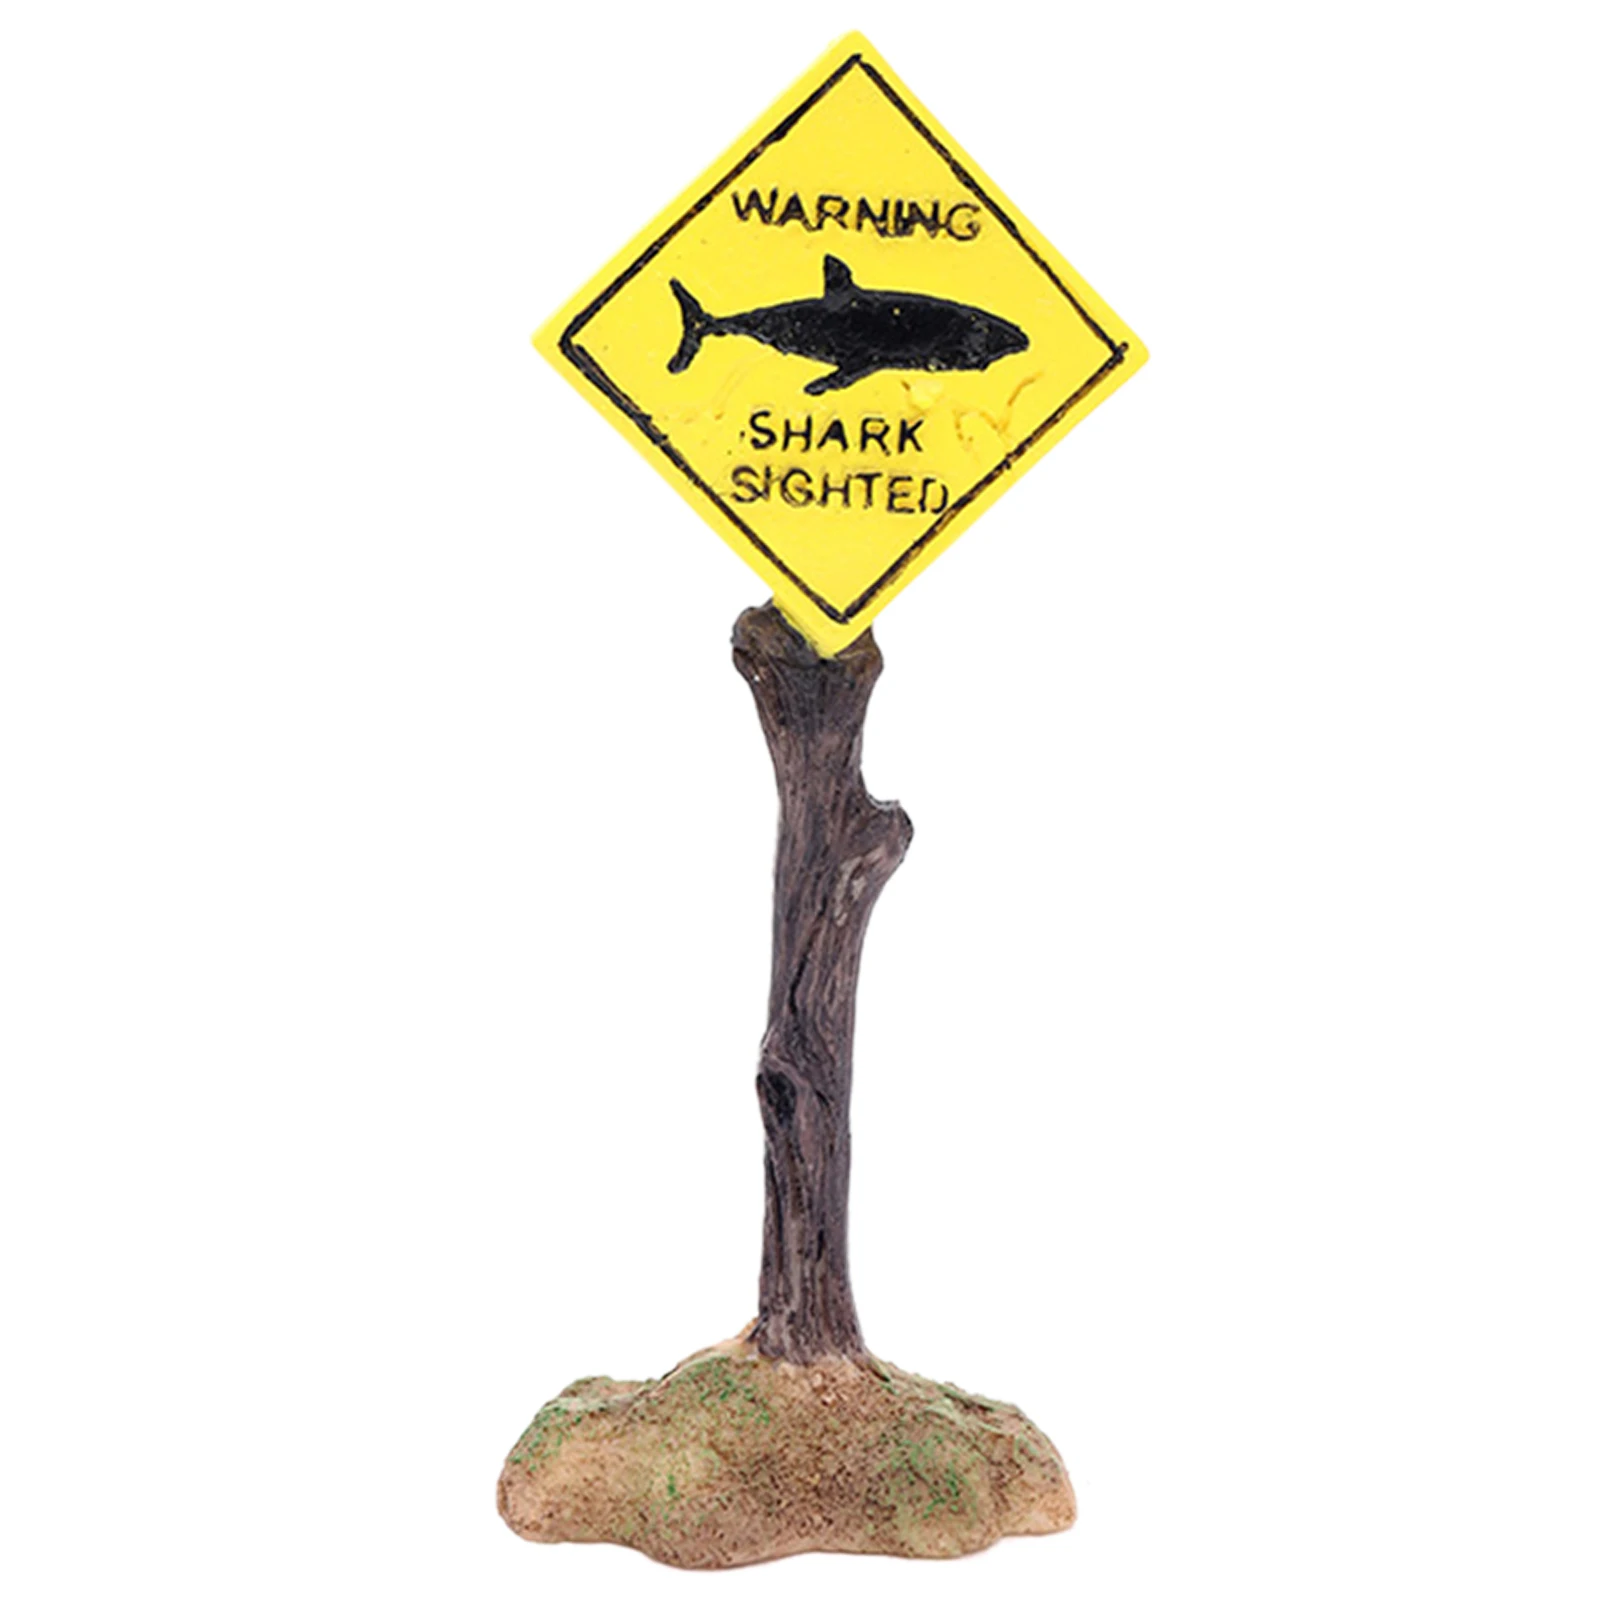 

Small Board Resin Accessories Fish Tank Decorations Craft Words Funny Home Rock Warning Sign For Safety Skeleton Shark Aquarium